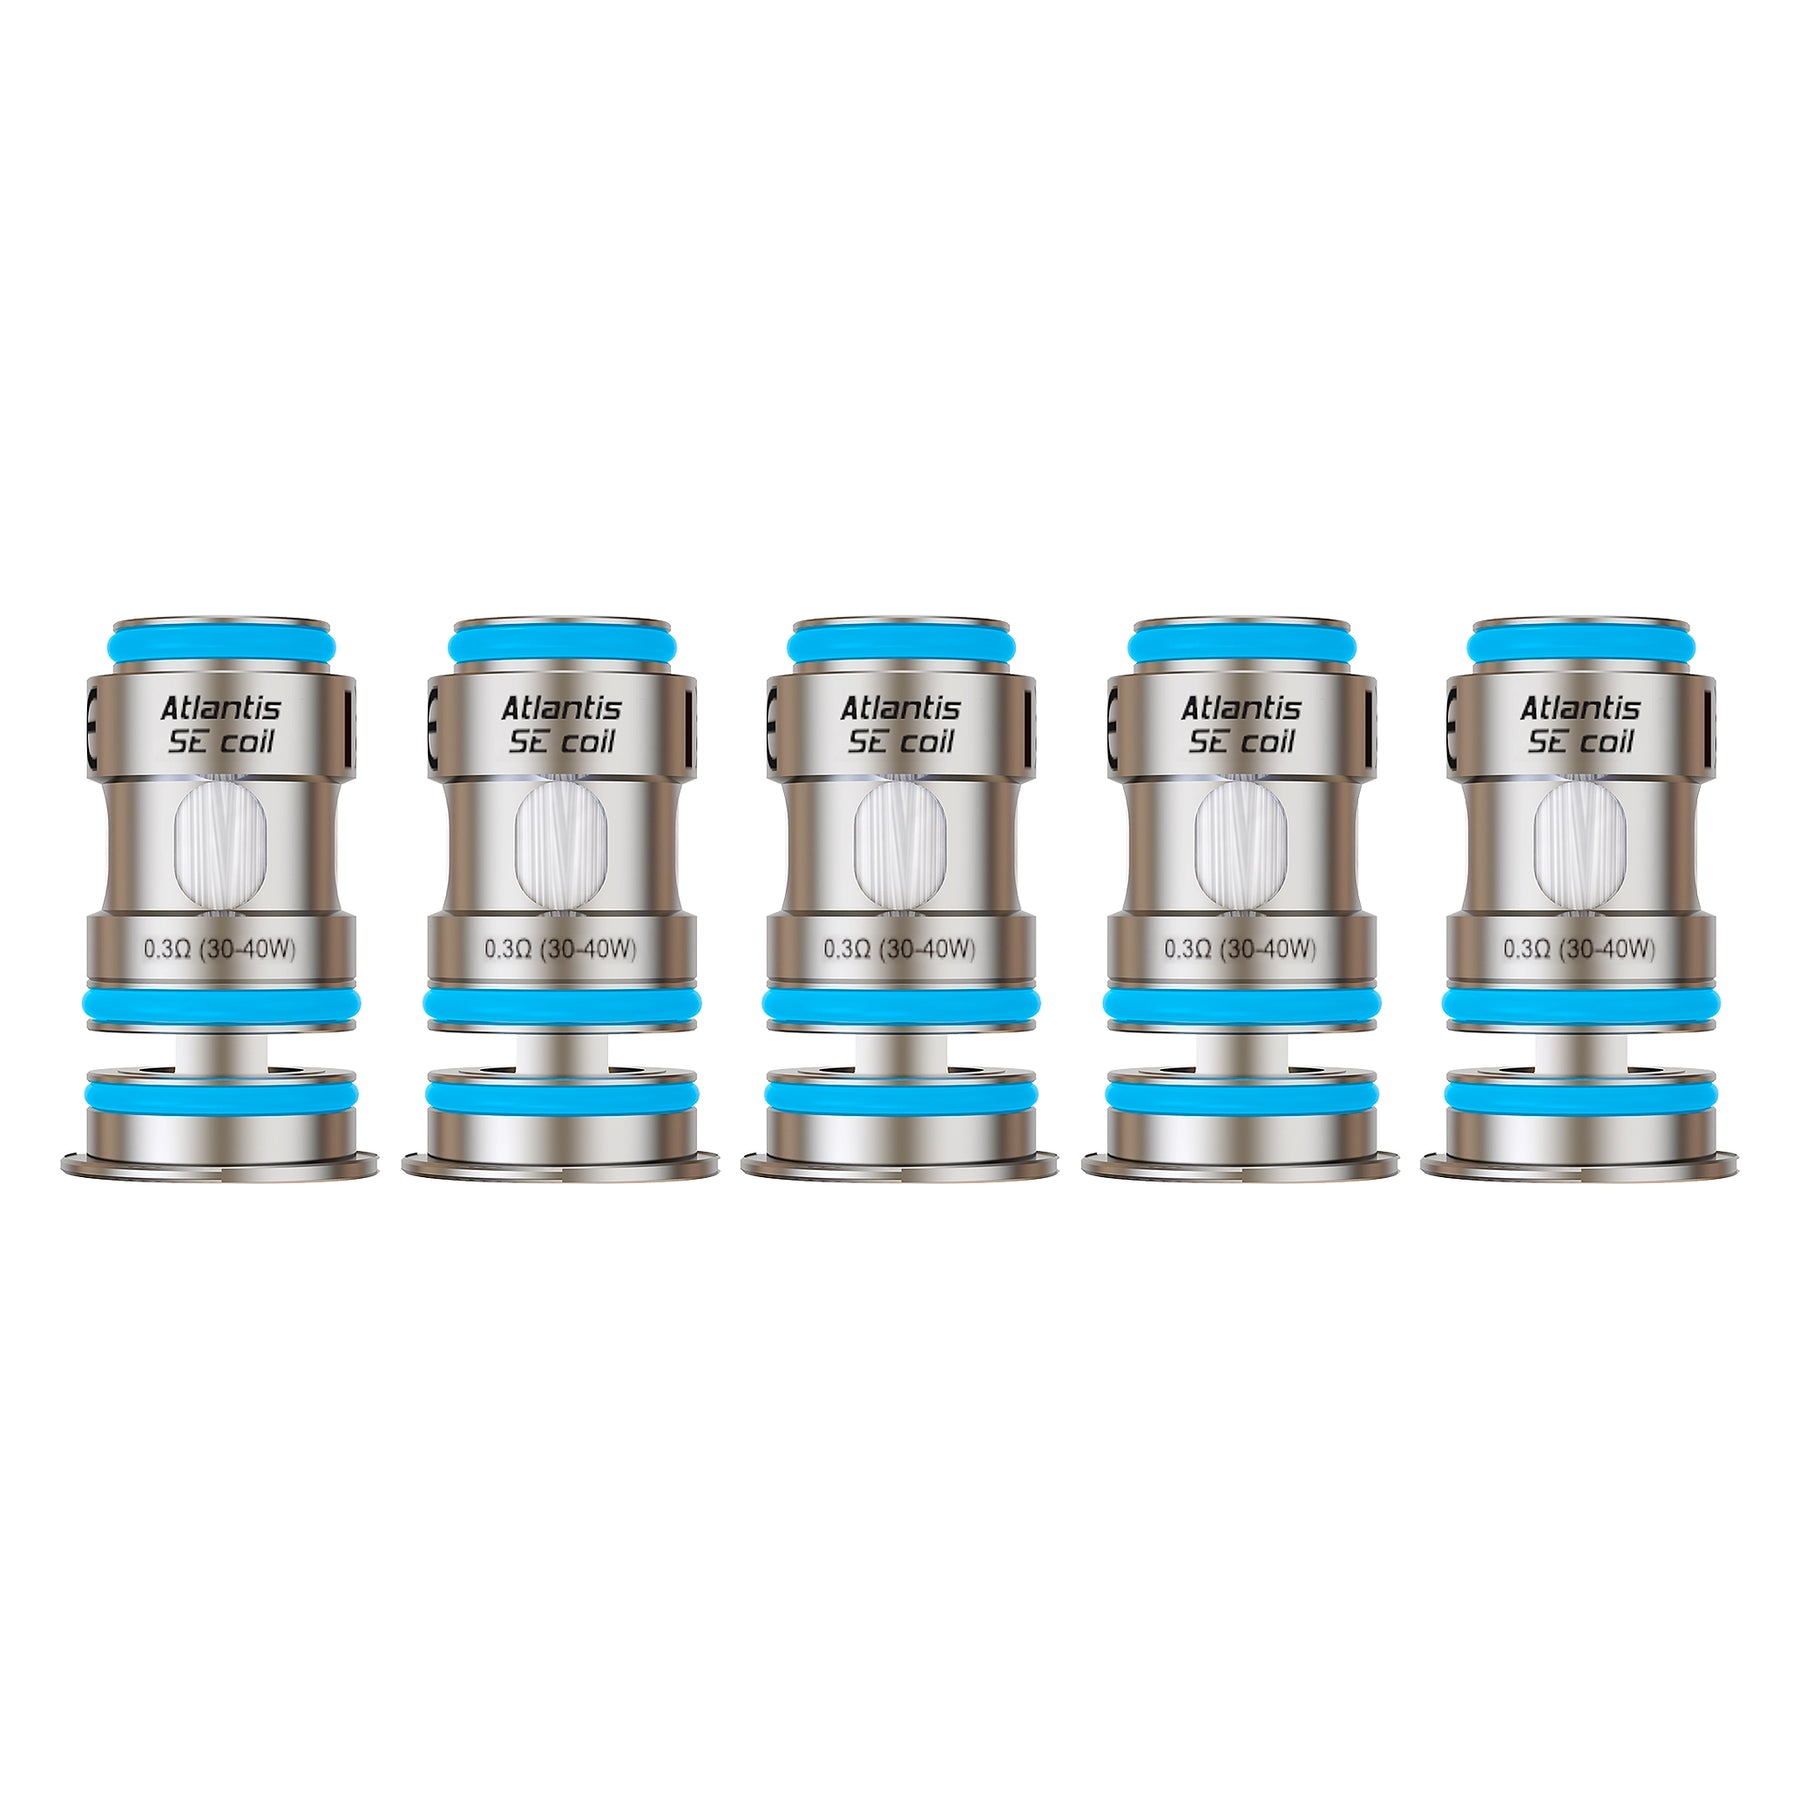 Aspire's Atlantis SE coils are designed for use with the Atlantis GT Tank only. There are 3 versions of this coil available, to support Direct To Lung vaping.Aspire's Atlantis SE coils are designed for use with the Atlantis GT Tank only. There are 3 versions of this coil available, to support Direct To Lung vaping.